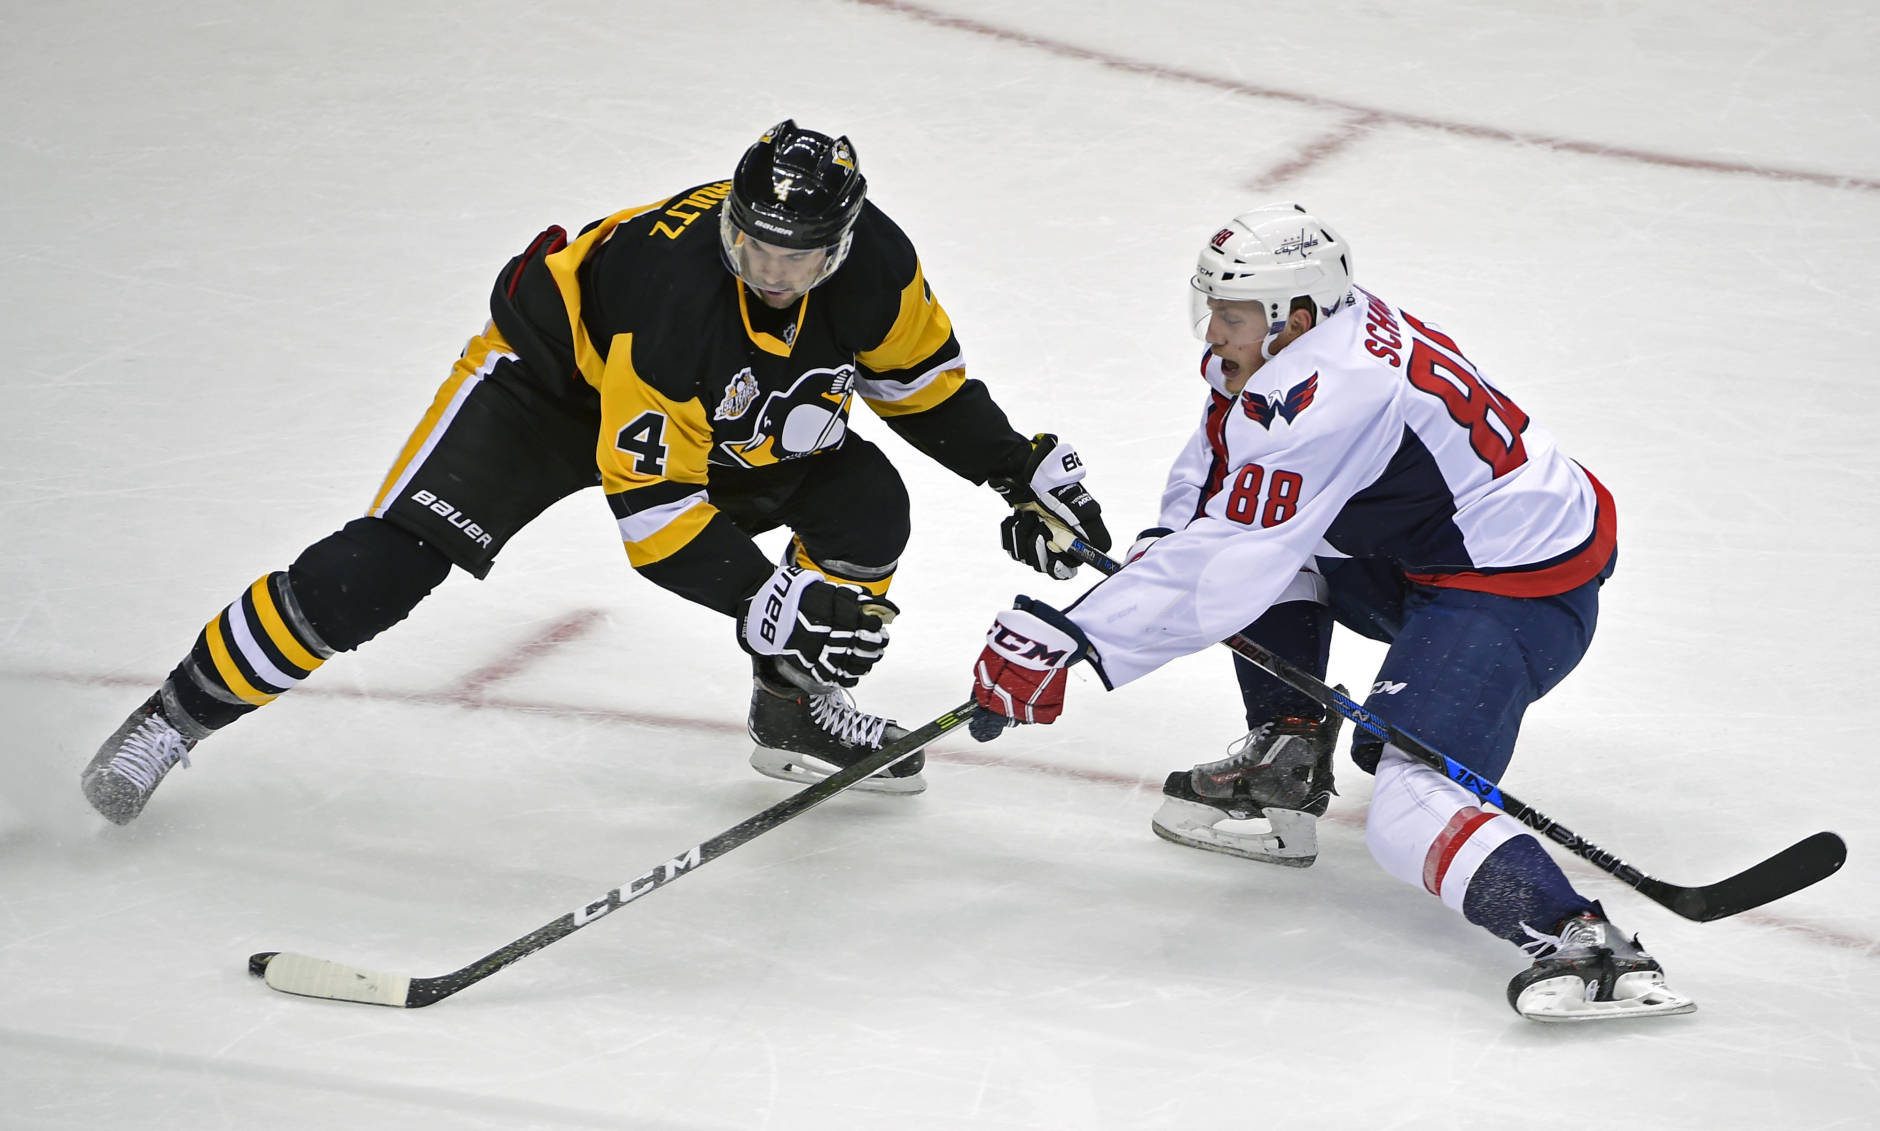 Pittsburgh Penguins defenseman Justin Schultz (4) tries to poke-check the puck off the stick of Washington Capitals defenseman Nate Schmidt (88) during the third period of an NHL hockey game Thursday, Oct. 13, 2016, in Pittsburgh. (AP Photo/Fred Vuich)